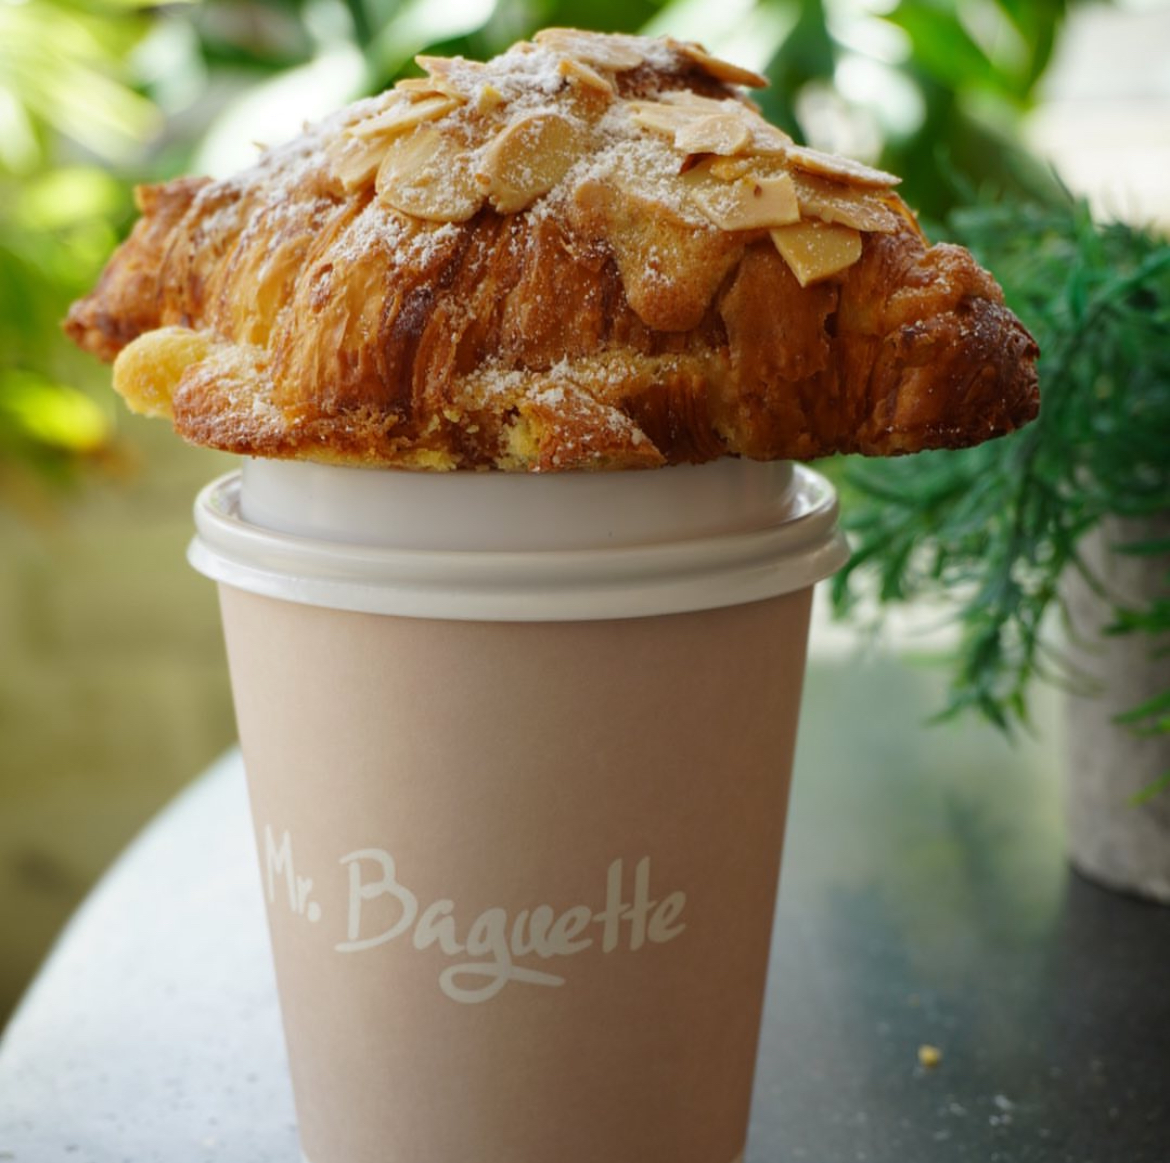 A coffee ☕️and pastry 🥐 to go from Mr. Baguette is the best way to start the weekend. 

#getsaucedelivery #saturday #coffeetogo #pastriestogo #croissant #miami #miamieats